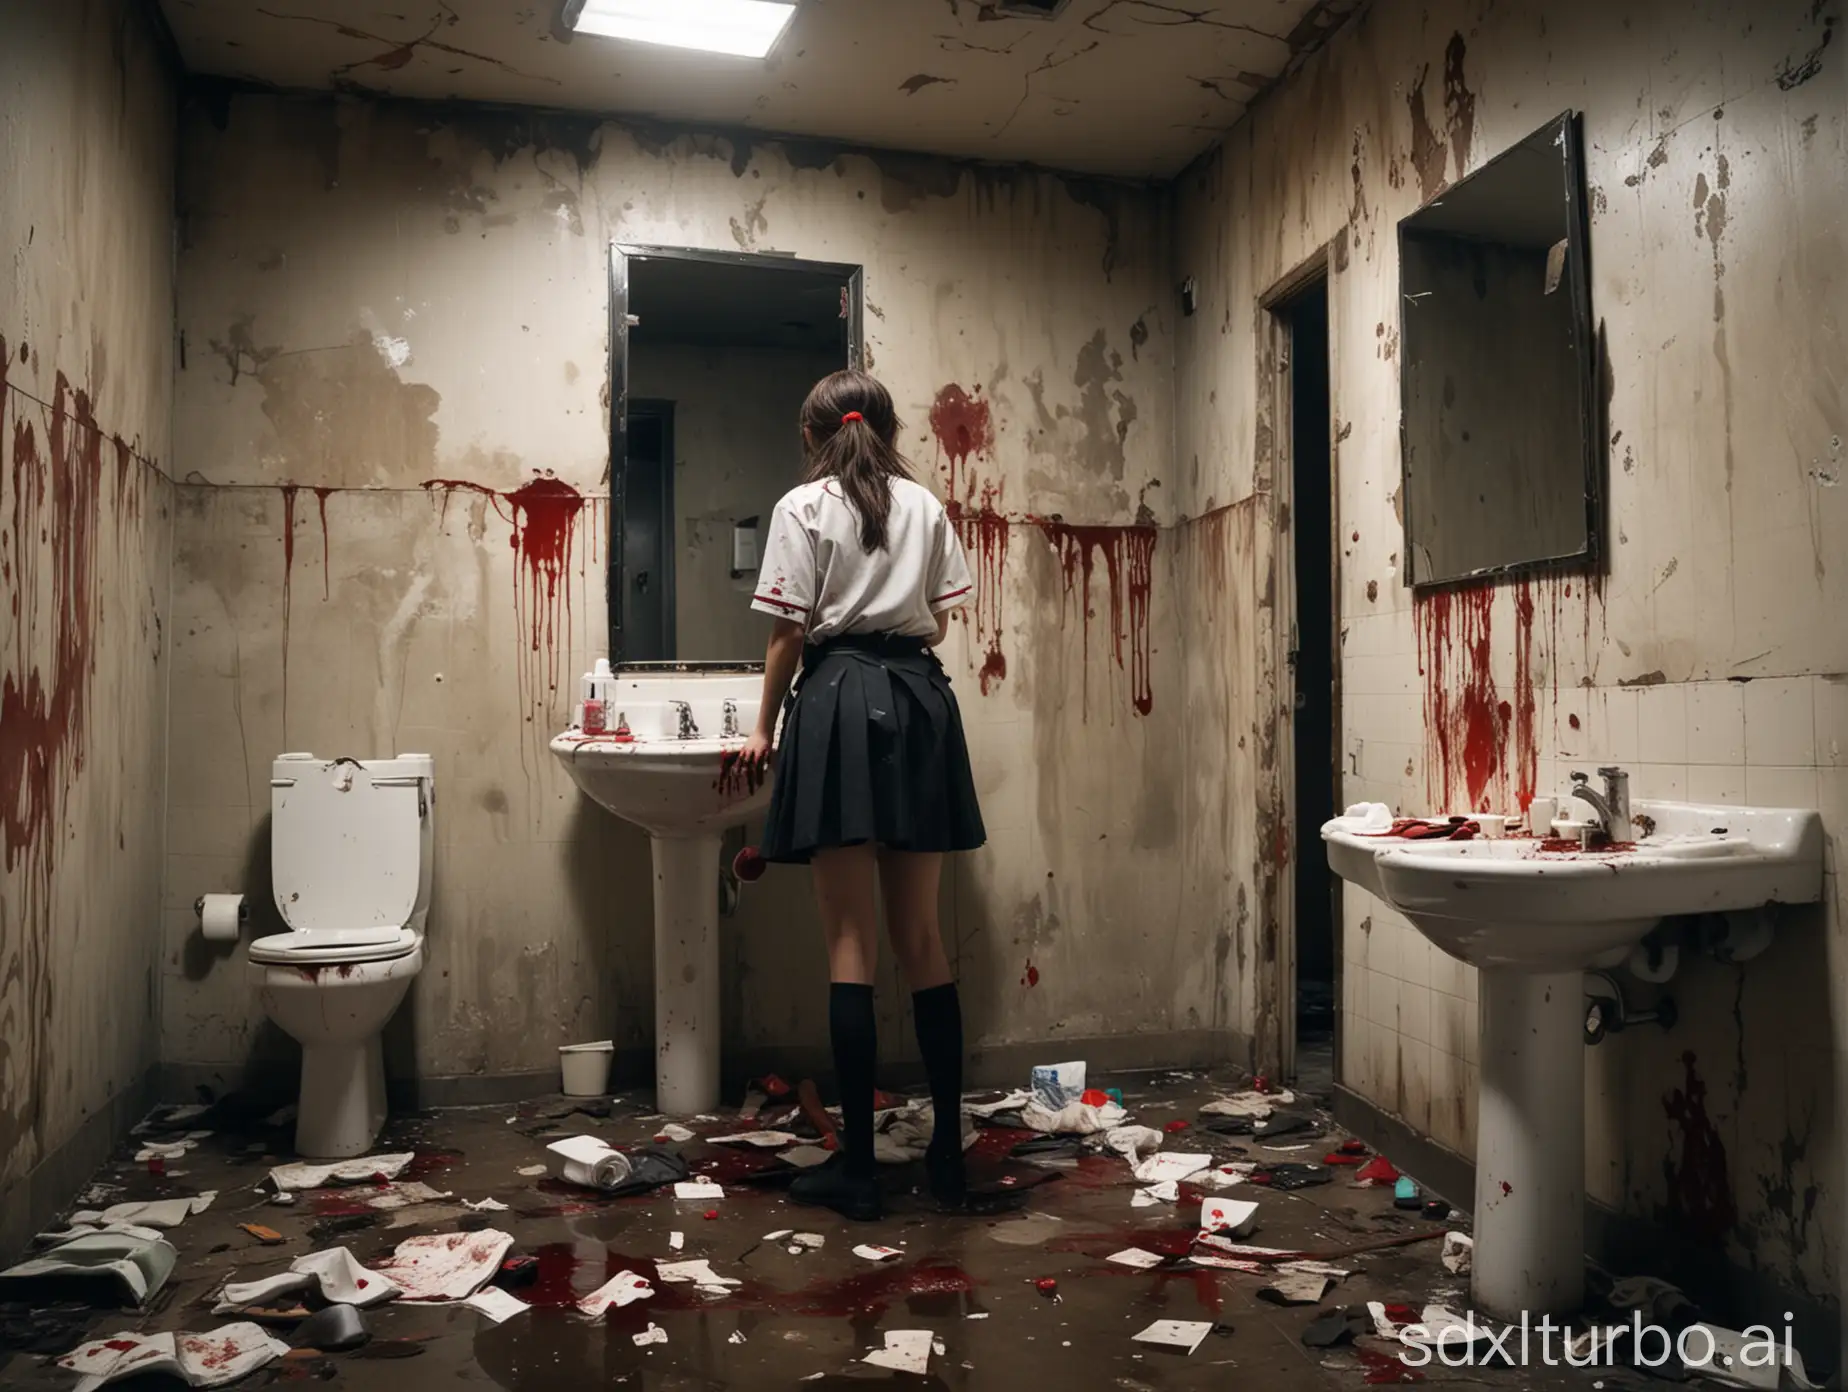 in a abandoned and ruined, dirty and messy restroom, there's bloodstains in the toilet, there's a large mirror, there's a washbasin, next to the washbasin is a female student, the female student is wearing a jk school uniform, the scene is dim and dark